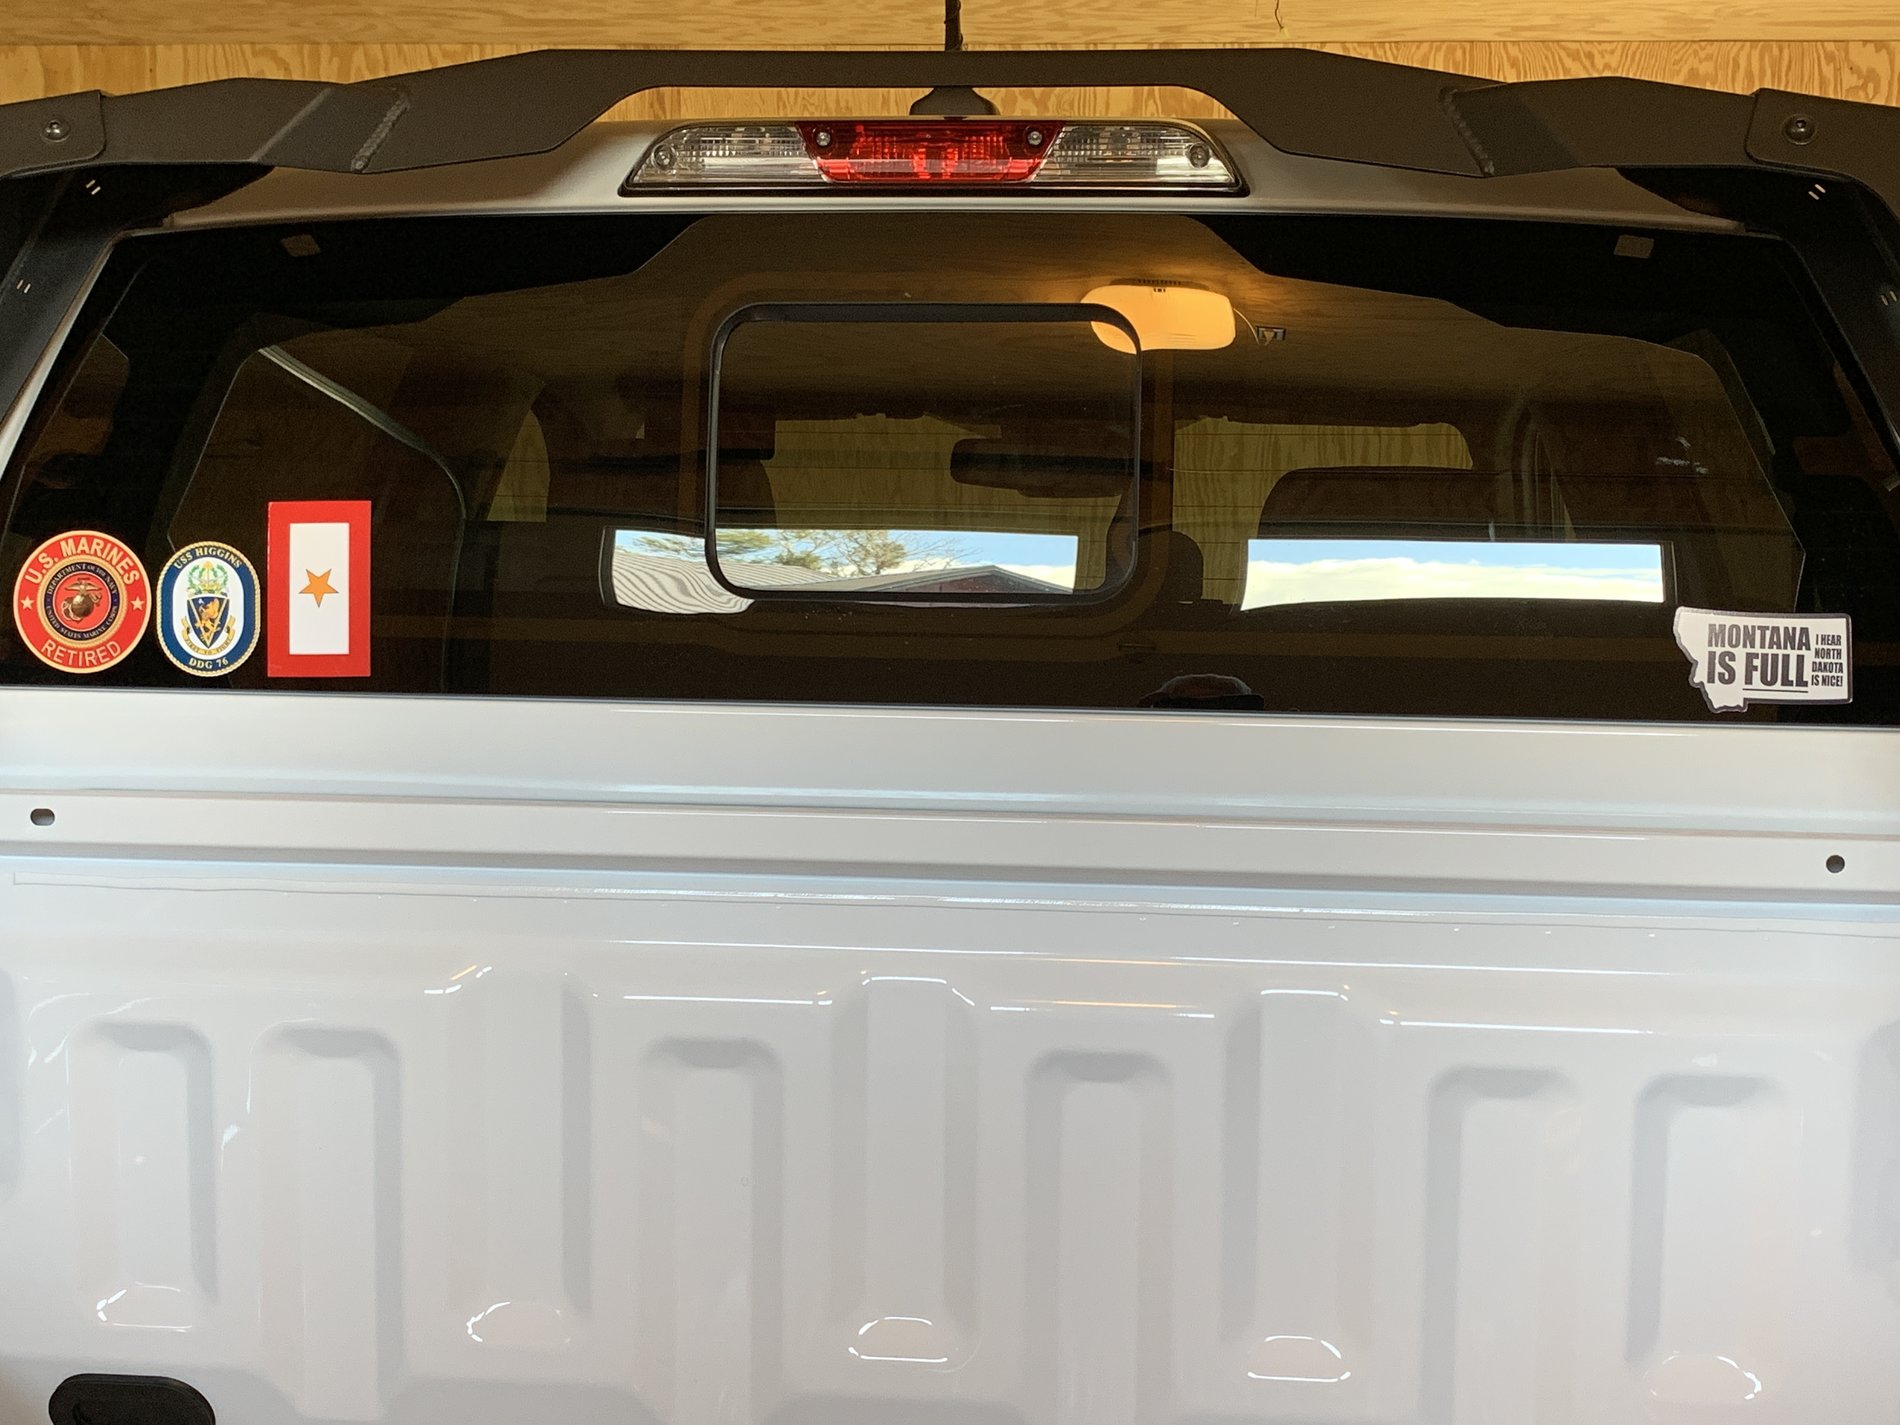 Ford Ranger Lets see those Cab window decals!! 03D649AB-4C9B-4F45-BD1E-6D6BE8187B7B